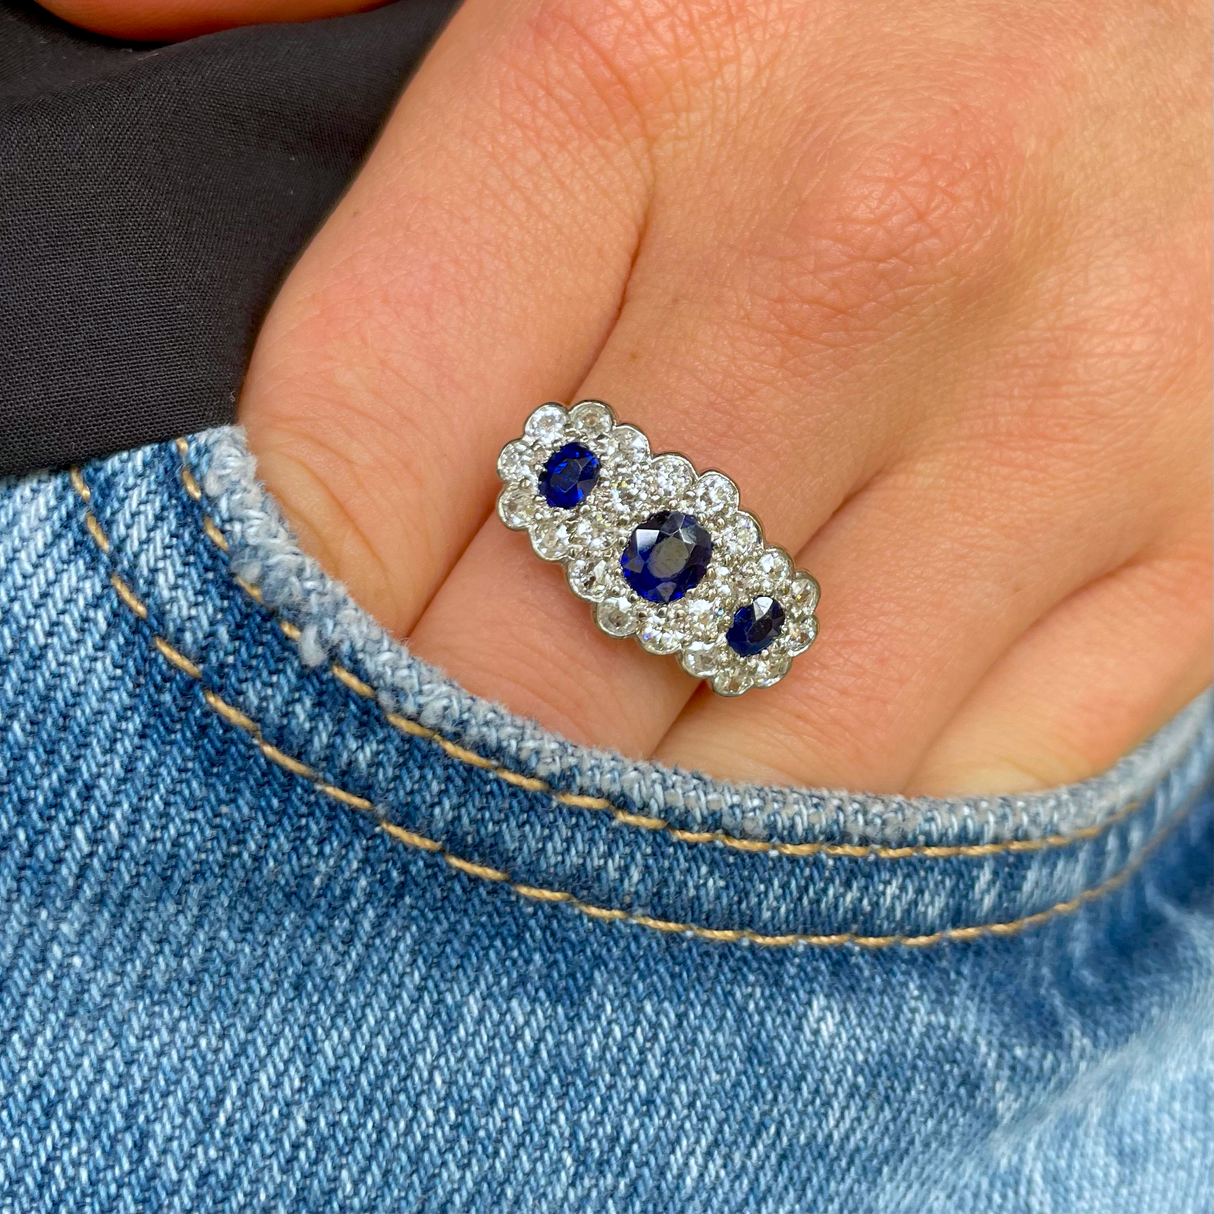 Antique sapphire and diamond triple cluster ring worn on hand.